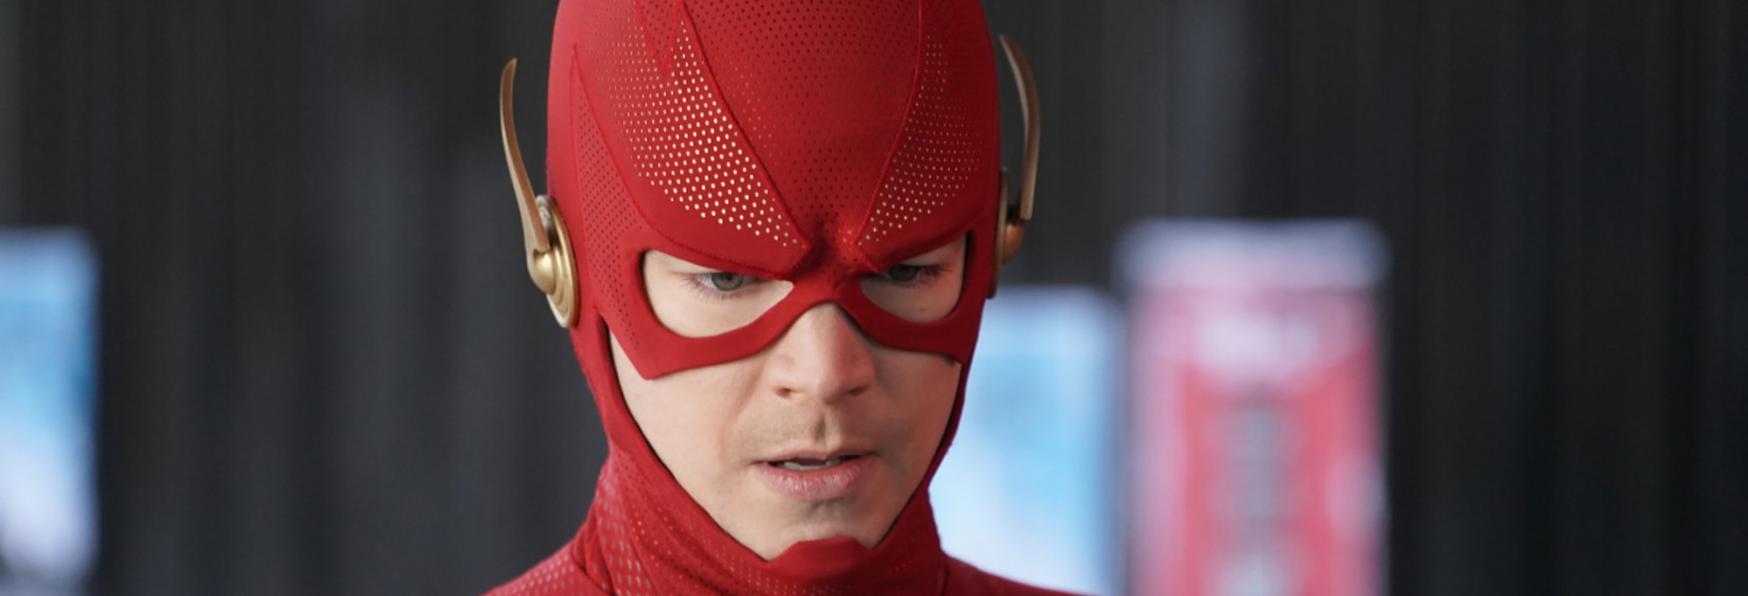 The Flash 9: the new Photos from the Set anticipate the Return of a Villain